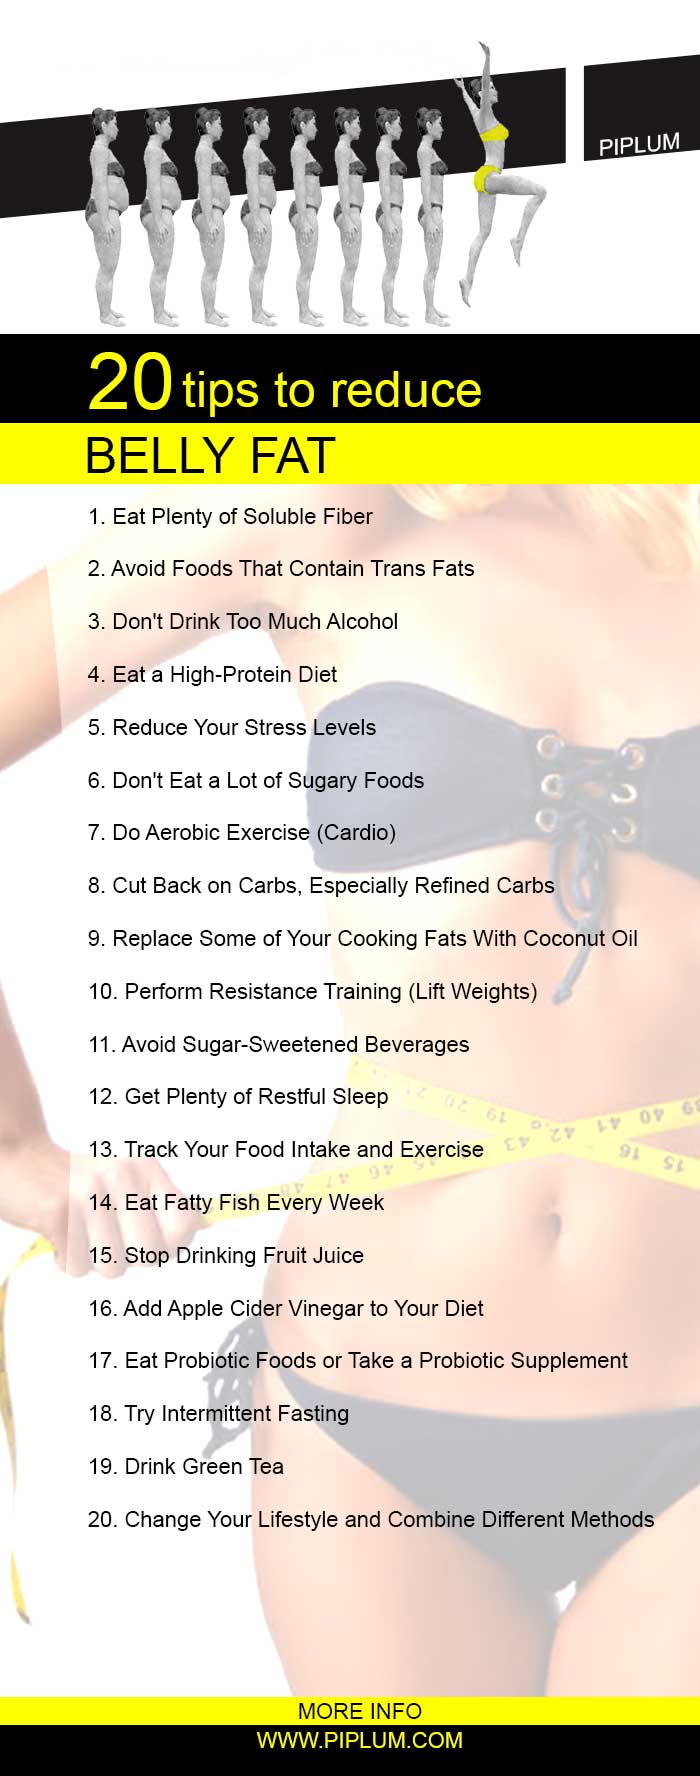 How to reduce belly fat. 20 tips. Poster.